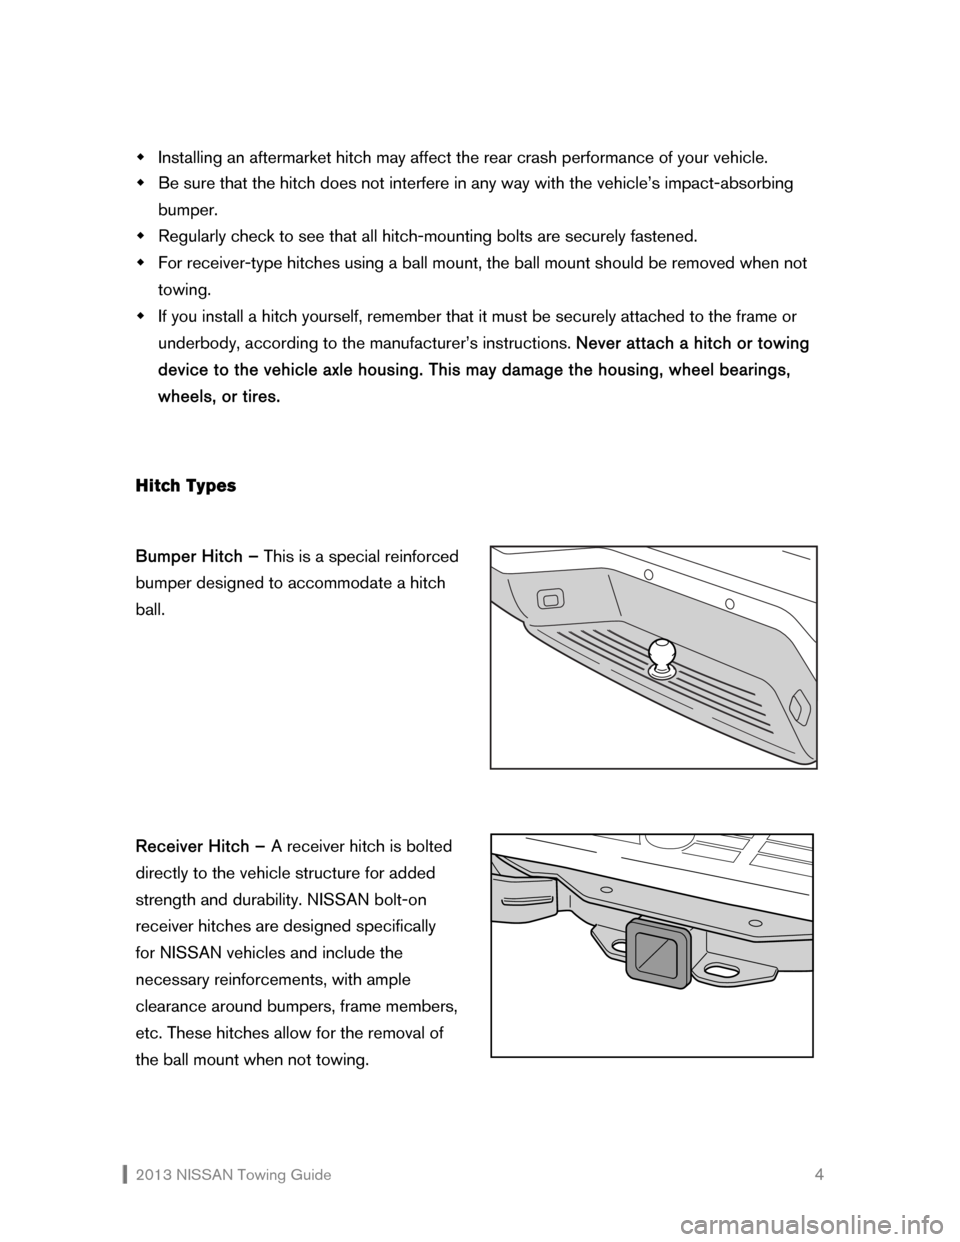 NISSAN 370Z COUPE 2013 Z34 Towing Guide  2013 NISSAN Towing Guide    4  Š Installing an aftermarket hitch may affect the rear crash performance of your vehicle. 
 Š Be sure that the hitch does not interfere in any way with the vehicle’s